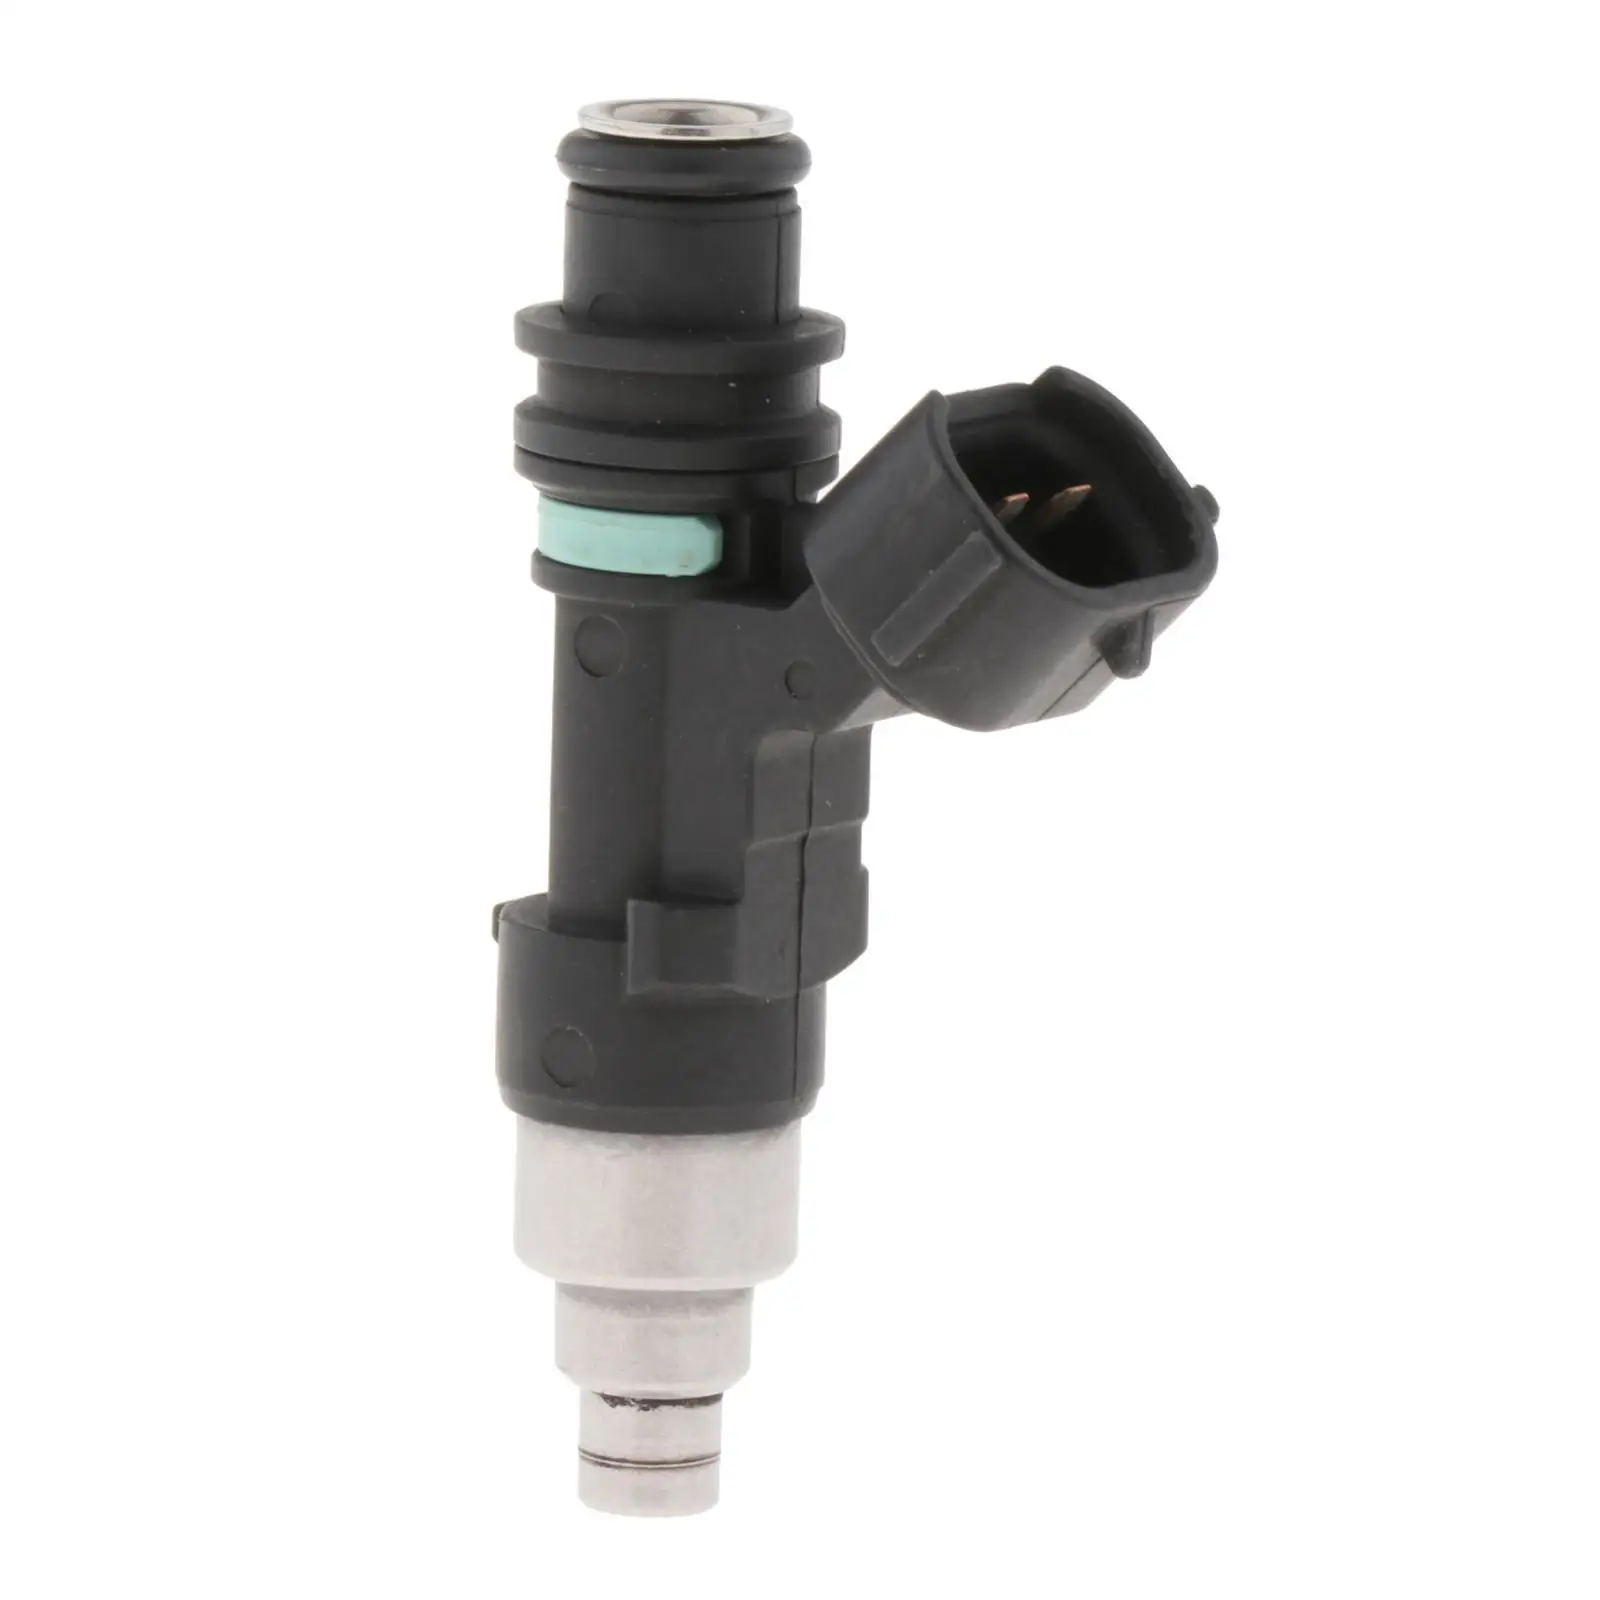 Fuel Injector Replaces 15710-82K50 Fit for Suzuki Outboard DF 90 Boat Parts Easy to Install High Performance Premium